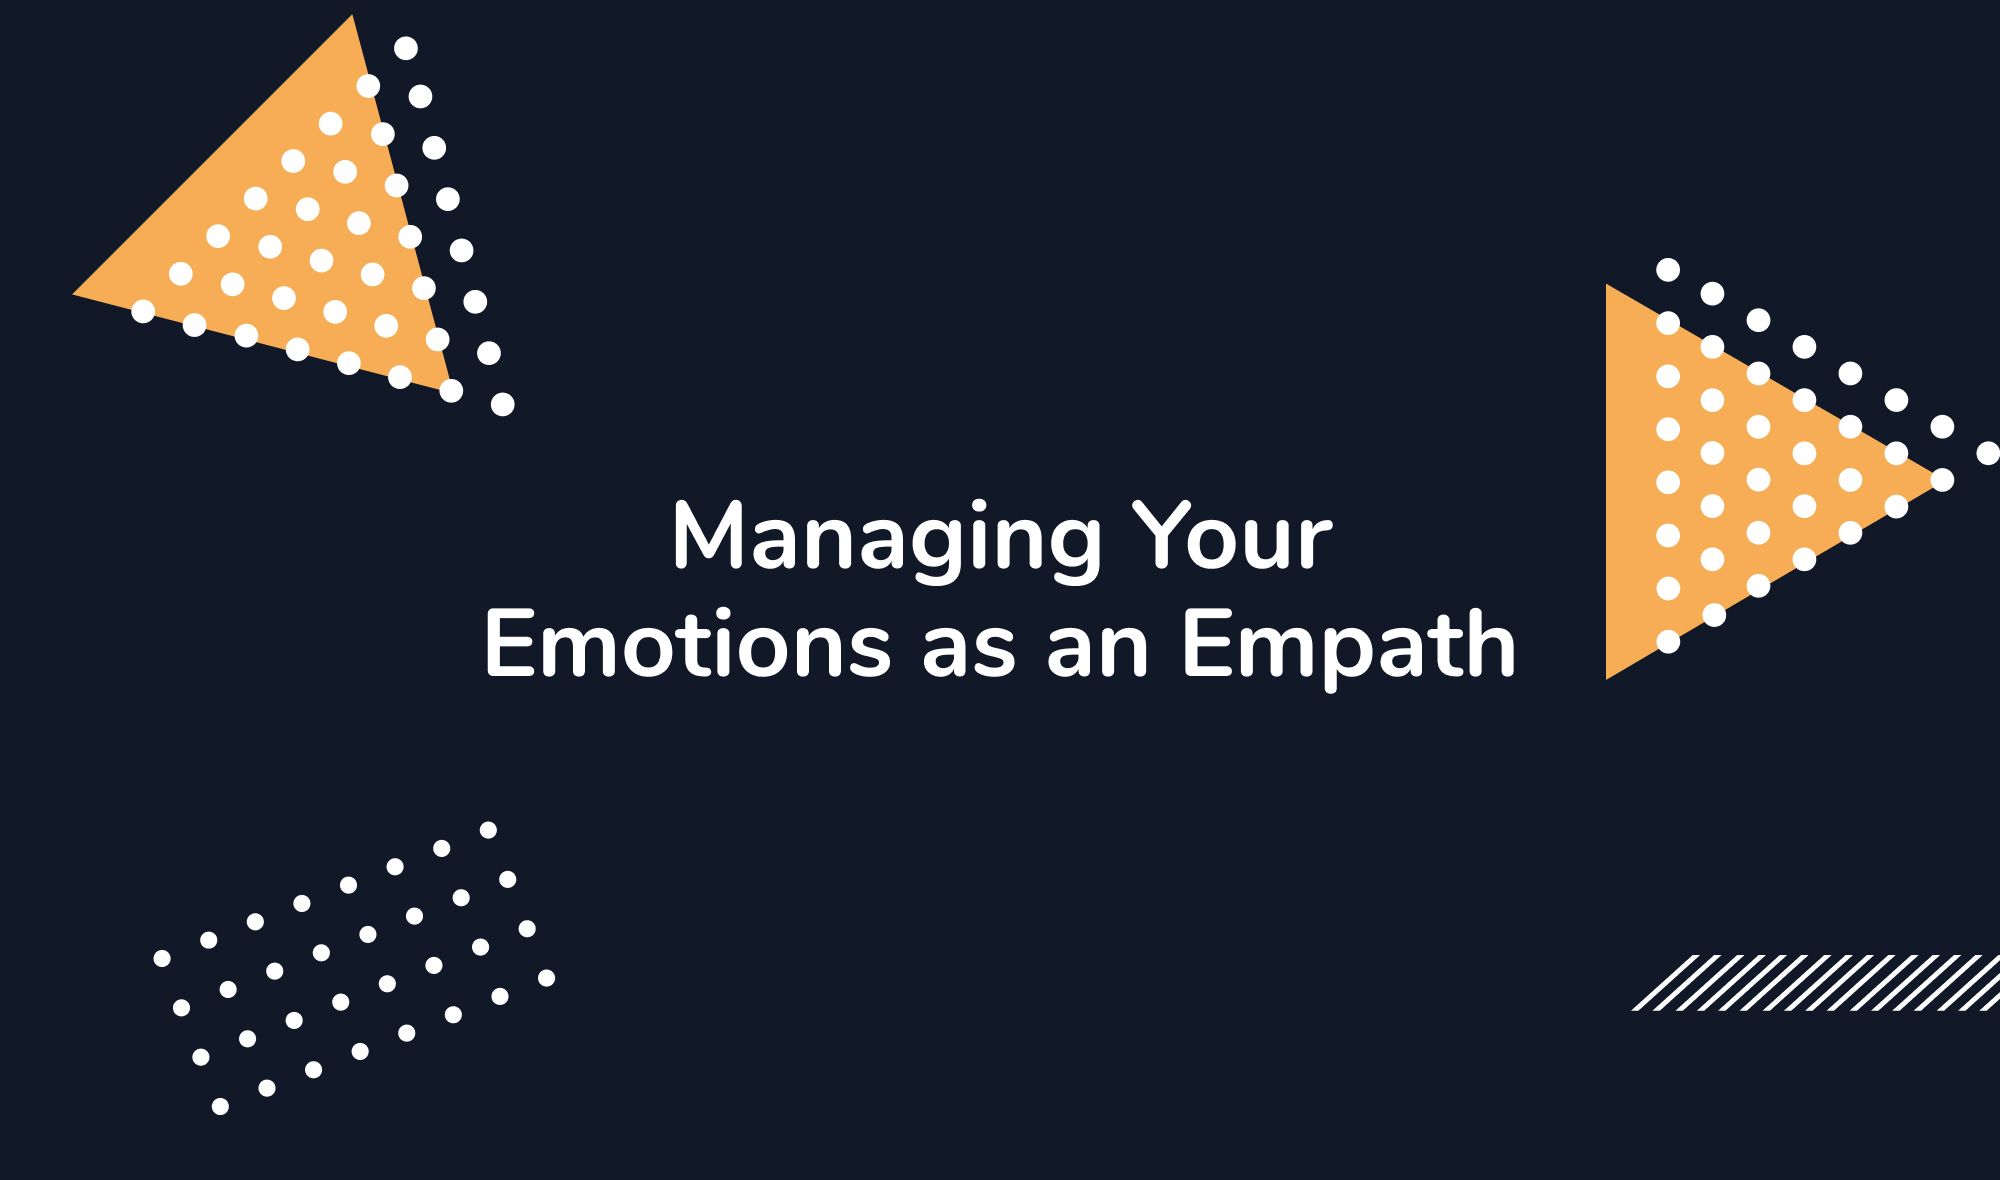 Managing Your Emotions as an Empath